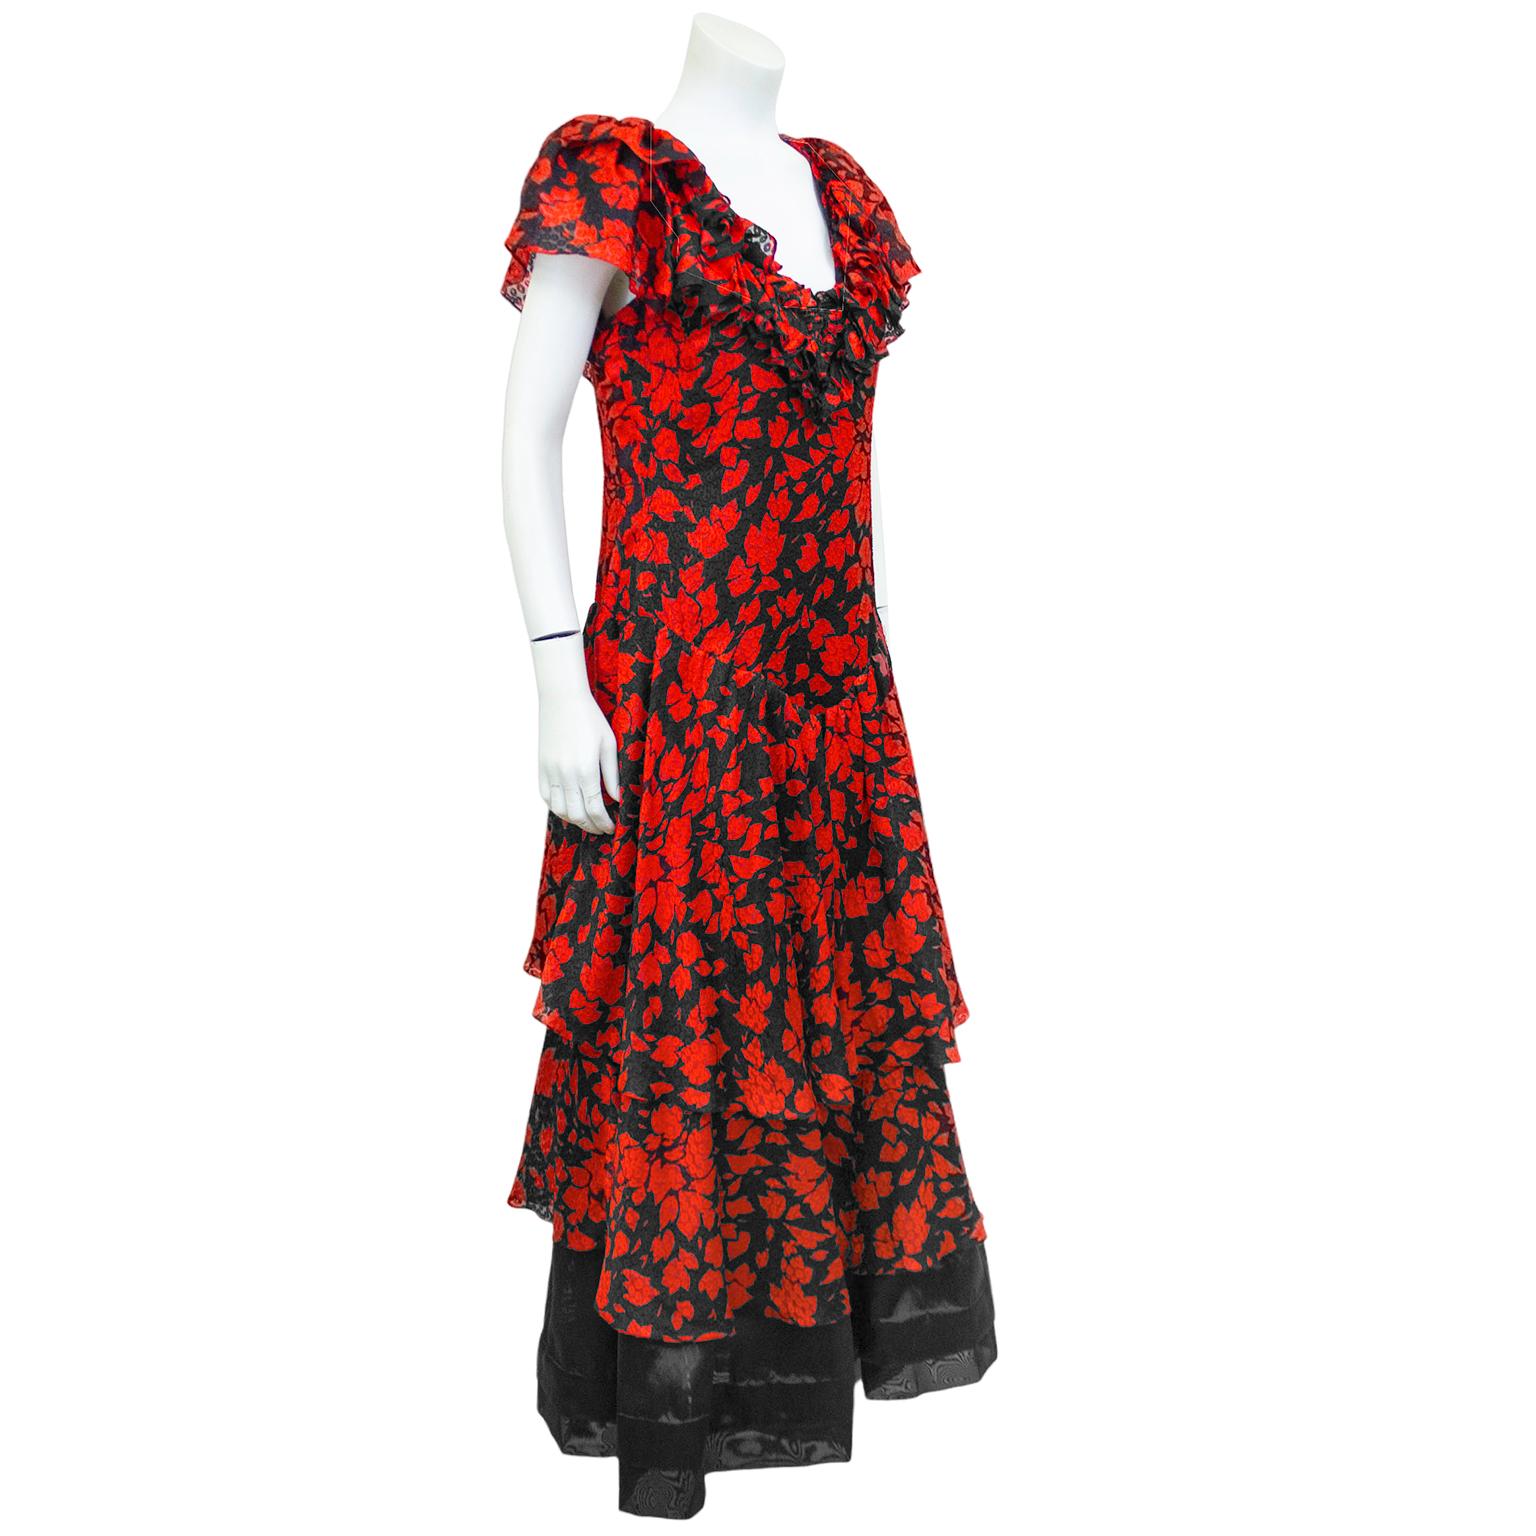 Vintage 1970s romantic red and black leaf print silk jacquard gown. Features ruffle at bust, short, romantic sleeves, tie at nape of neck, slight drop waist and tiered skirt. Black under skirt shows at bottom of gown. Excellent vintage condition.